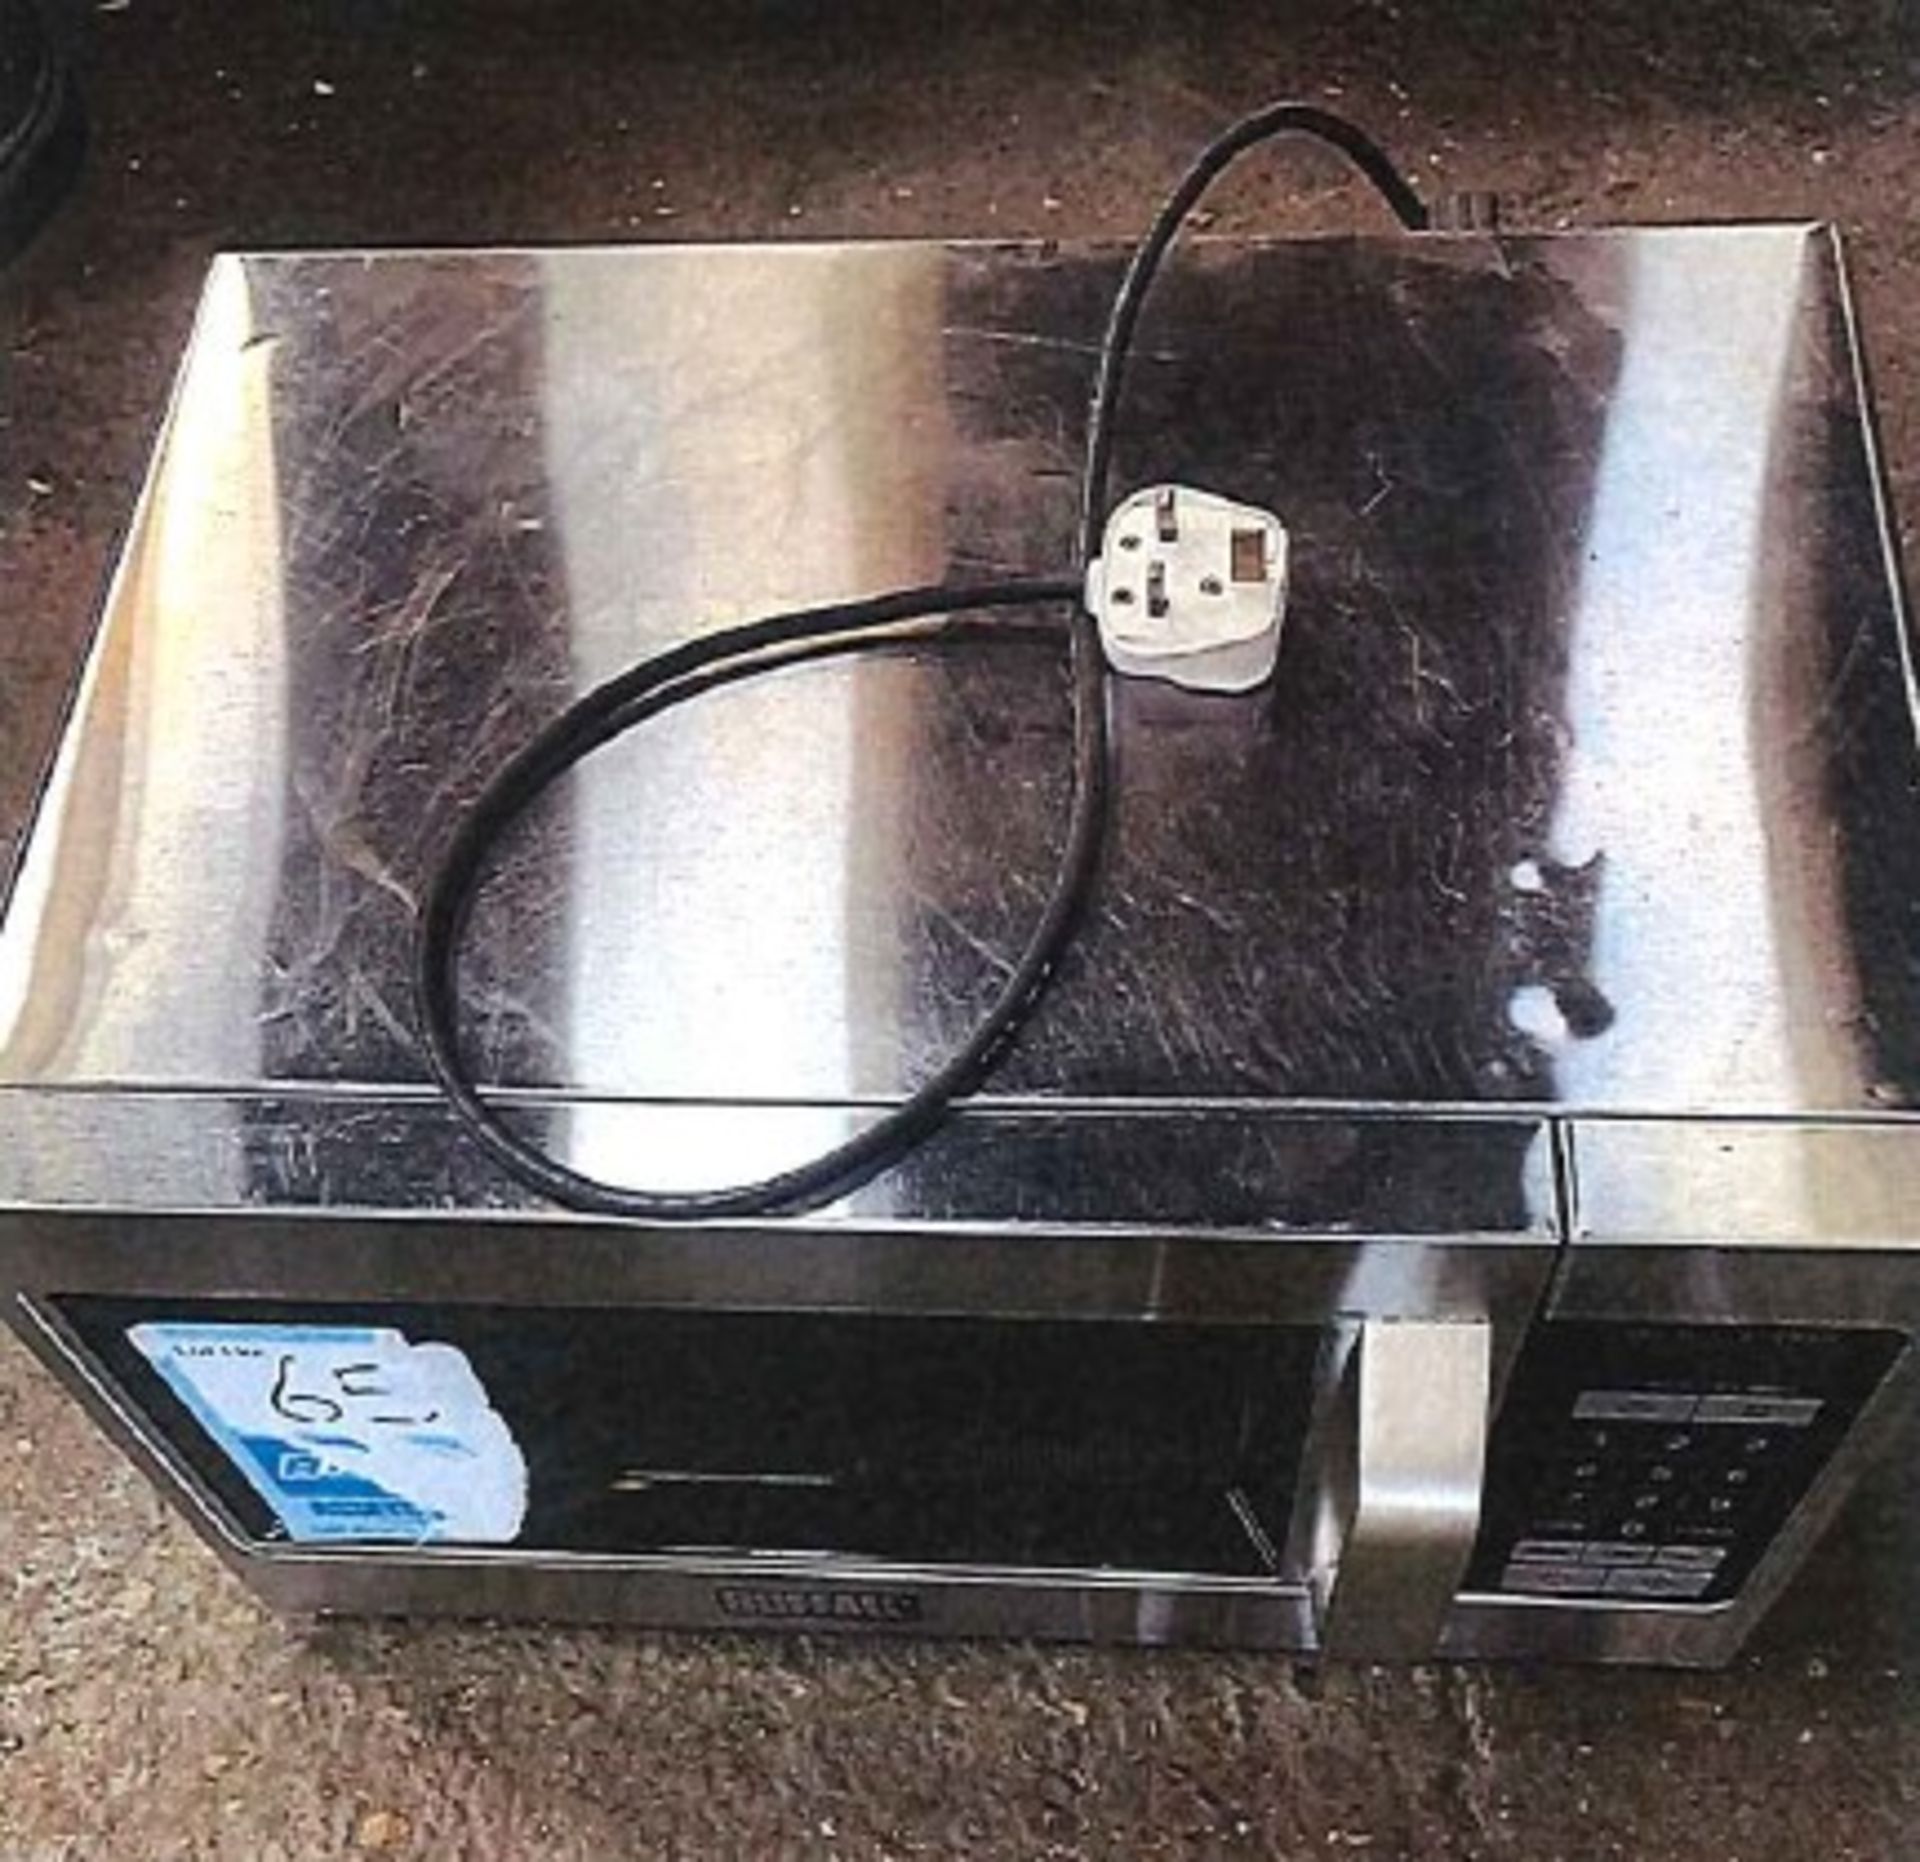 Buffalo Stainless Steel Oven - Ref: 15 - CL464 - Location: Liverpool L19